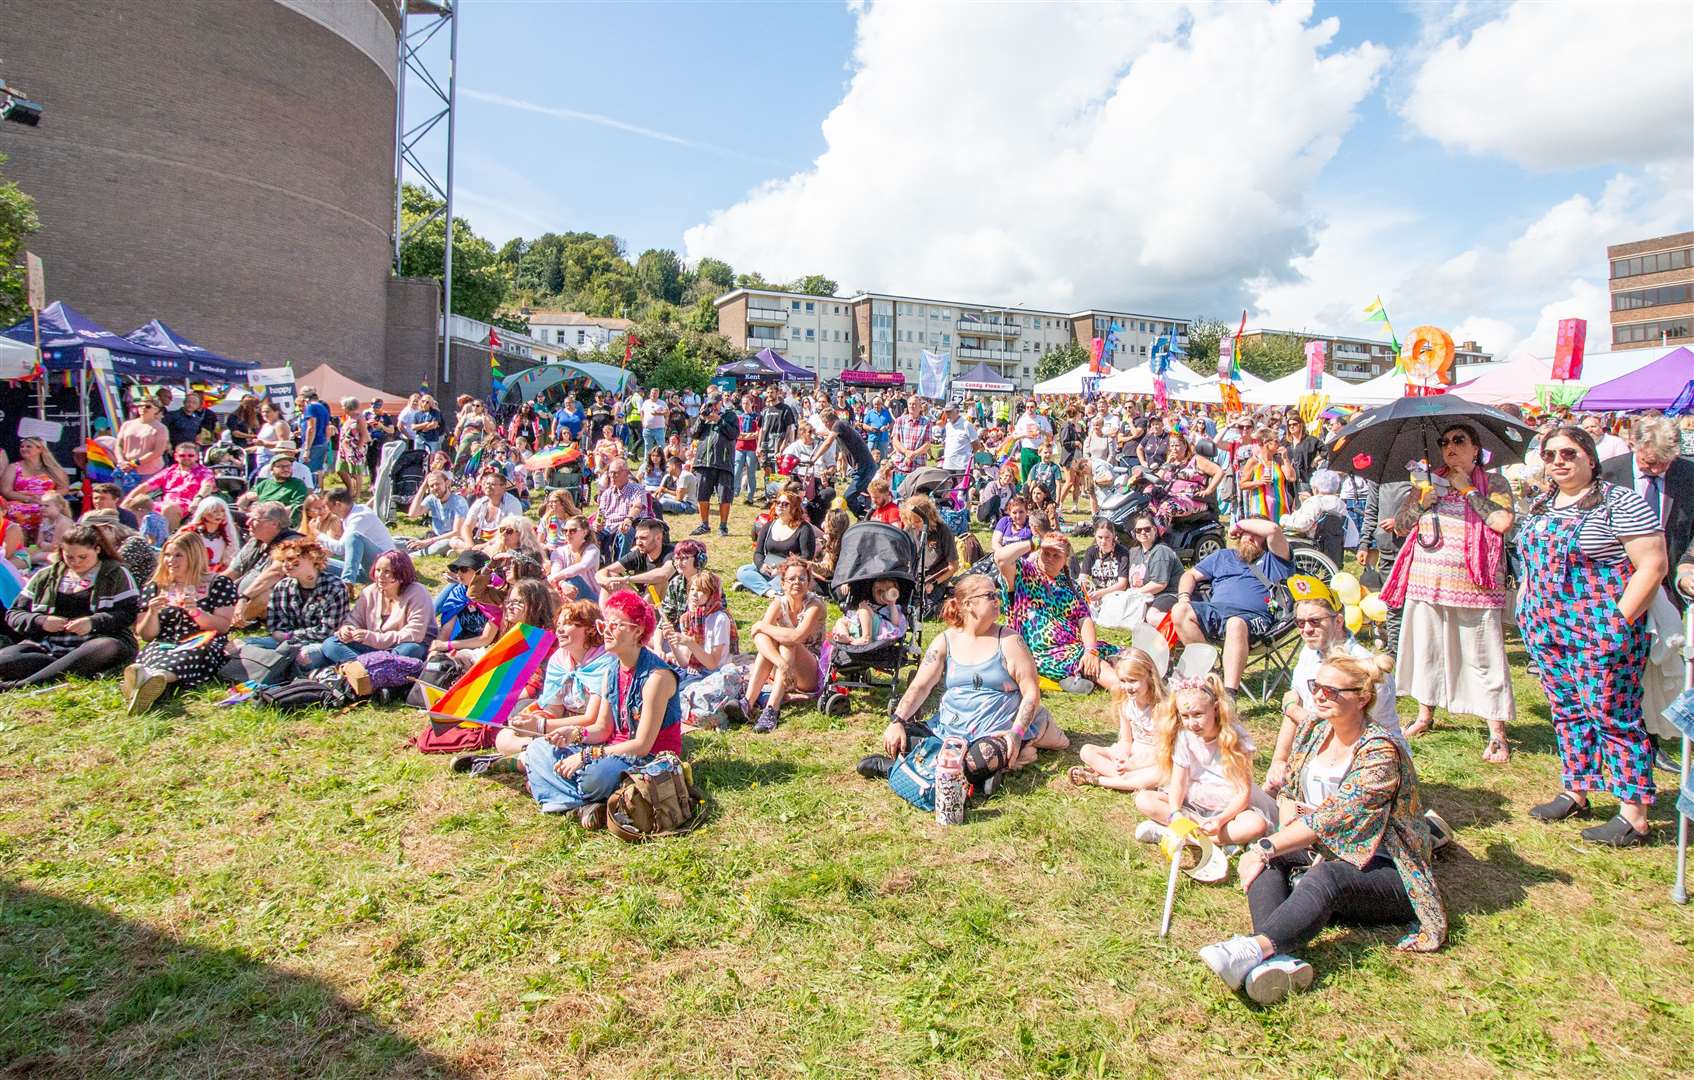 Crowds gathered at the main stage at the Roman lawn. Picture: David Goodson/Dover Pride